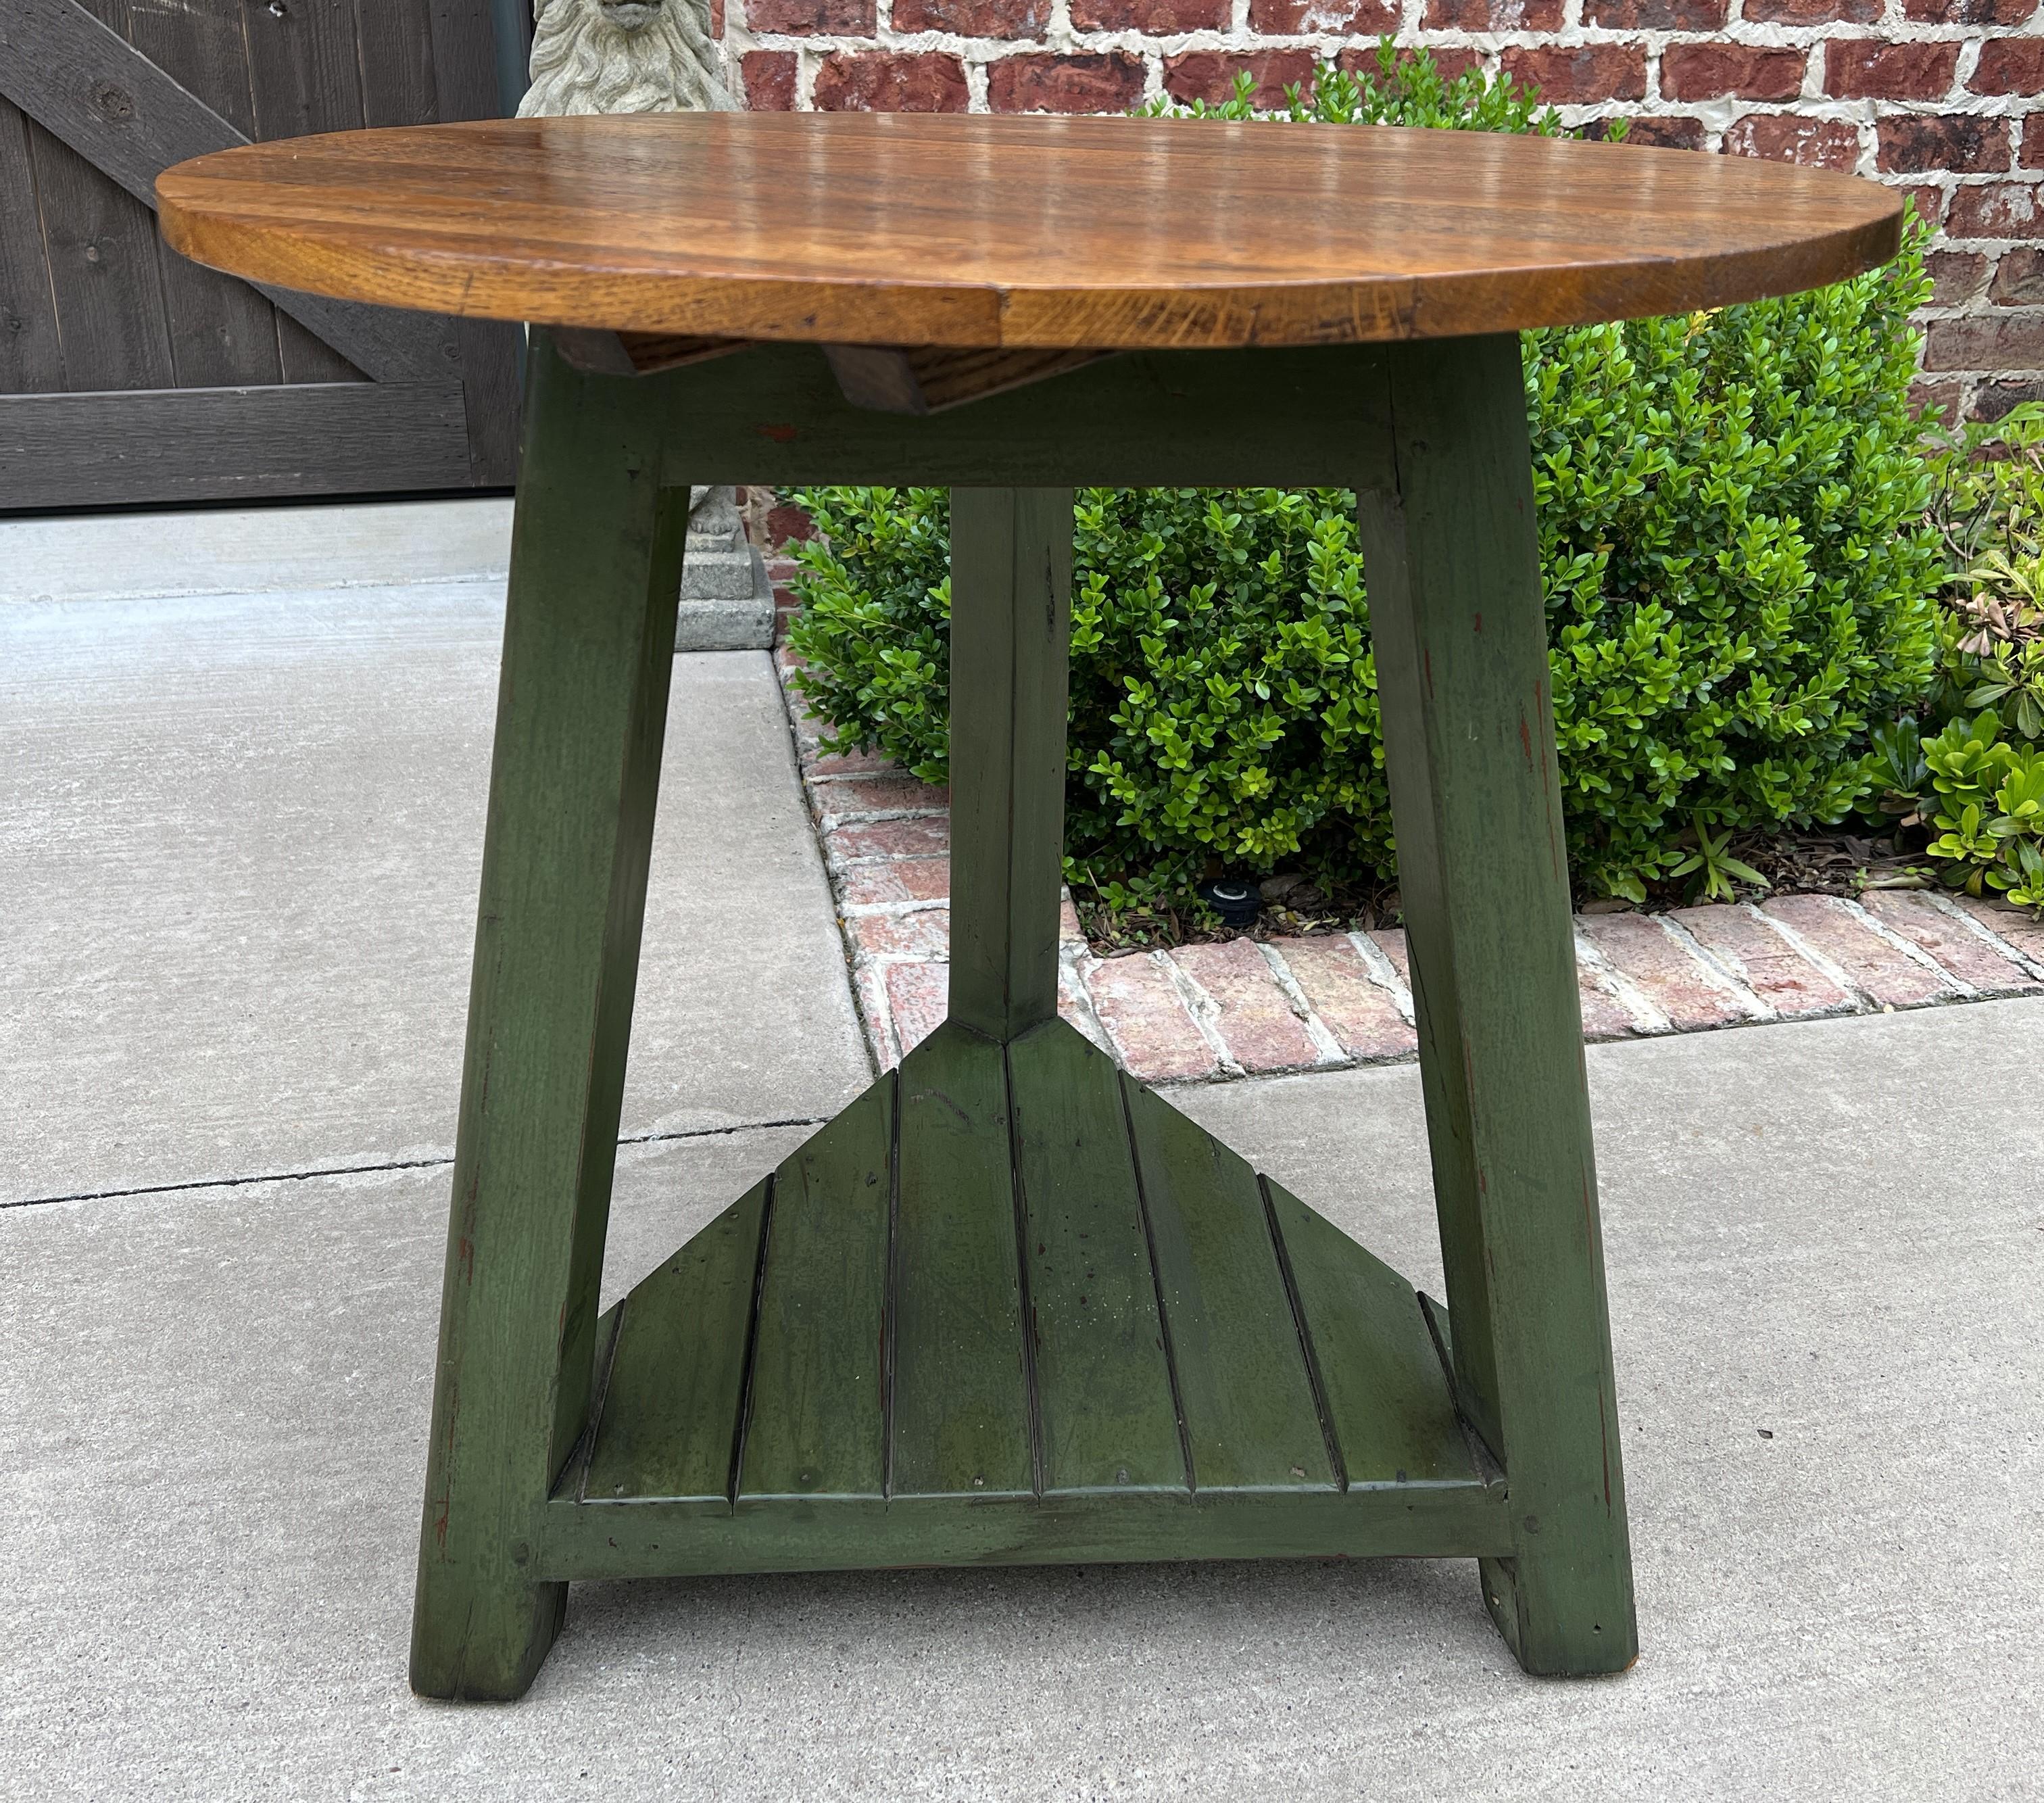 CHARMING and UNIQUE Vintage English ROUND oak top cricket table, end Table, Bedside Table with Three-Legged Green Painted Base and Legs~~Mid-20th century

 VERY versatile table~~a little history on 